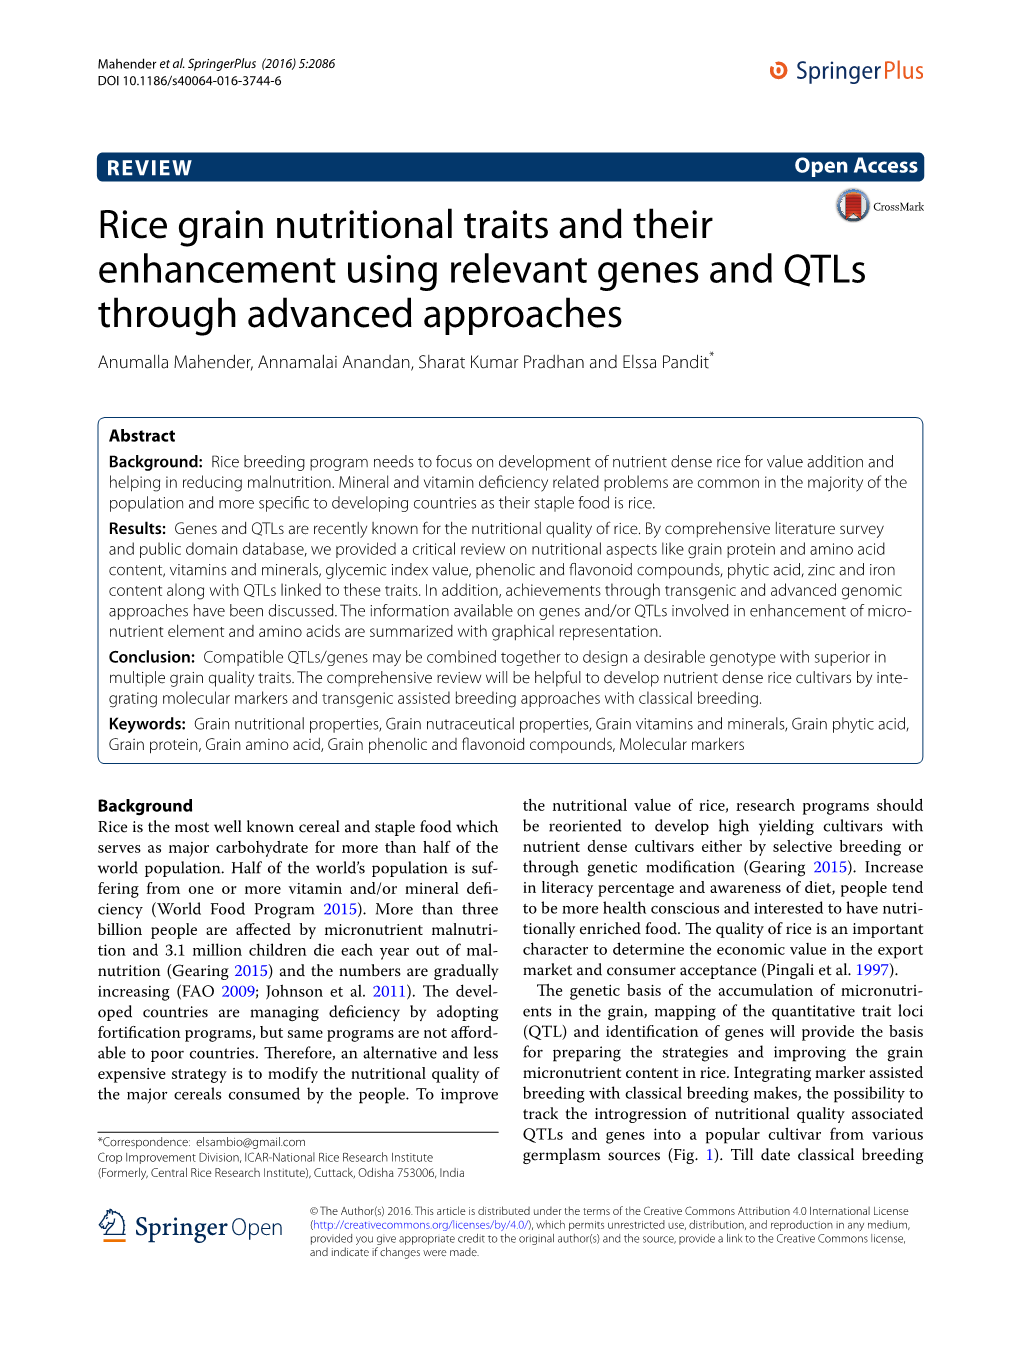 Rice Grain Nutritional Traits and Their Enhancement Using Relevant Genes